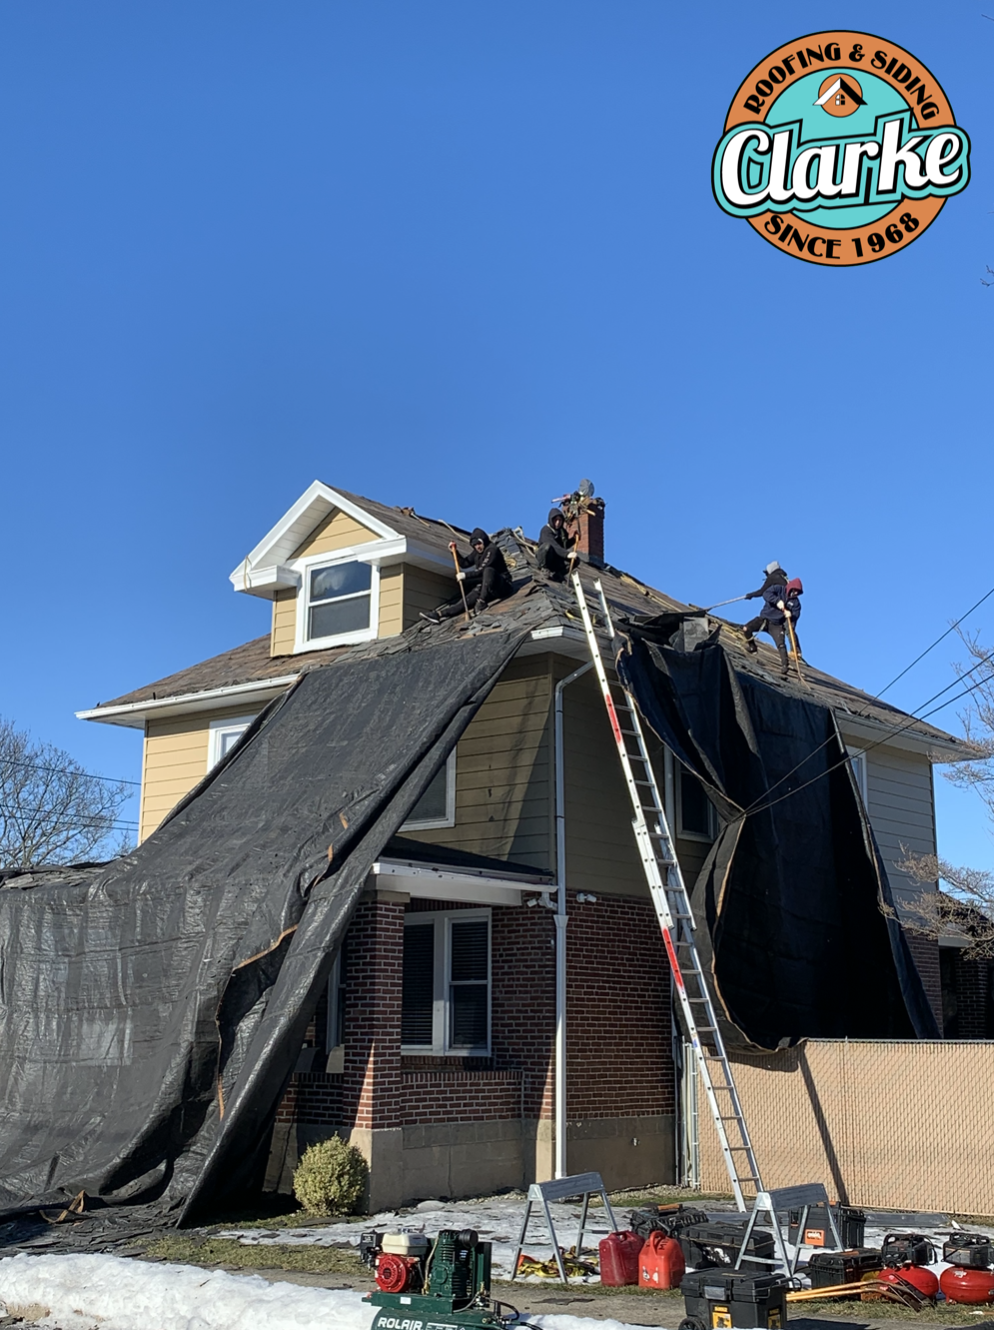 Clarke Roofing & Siding | 1924 PA-212, Quakertown, PA 18951 | Phone: (610) 844-4822